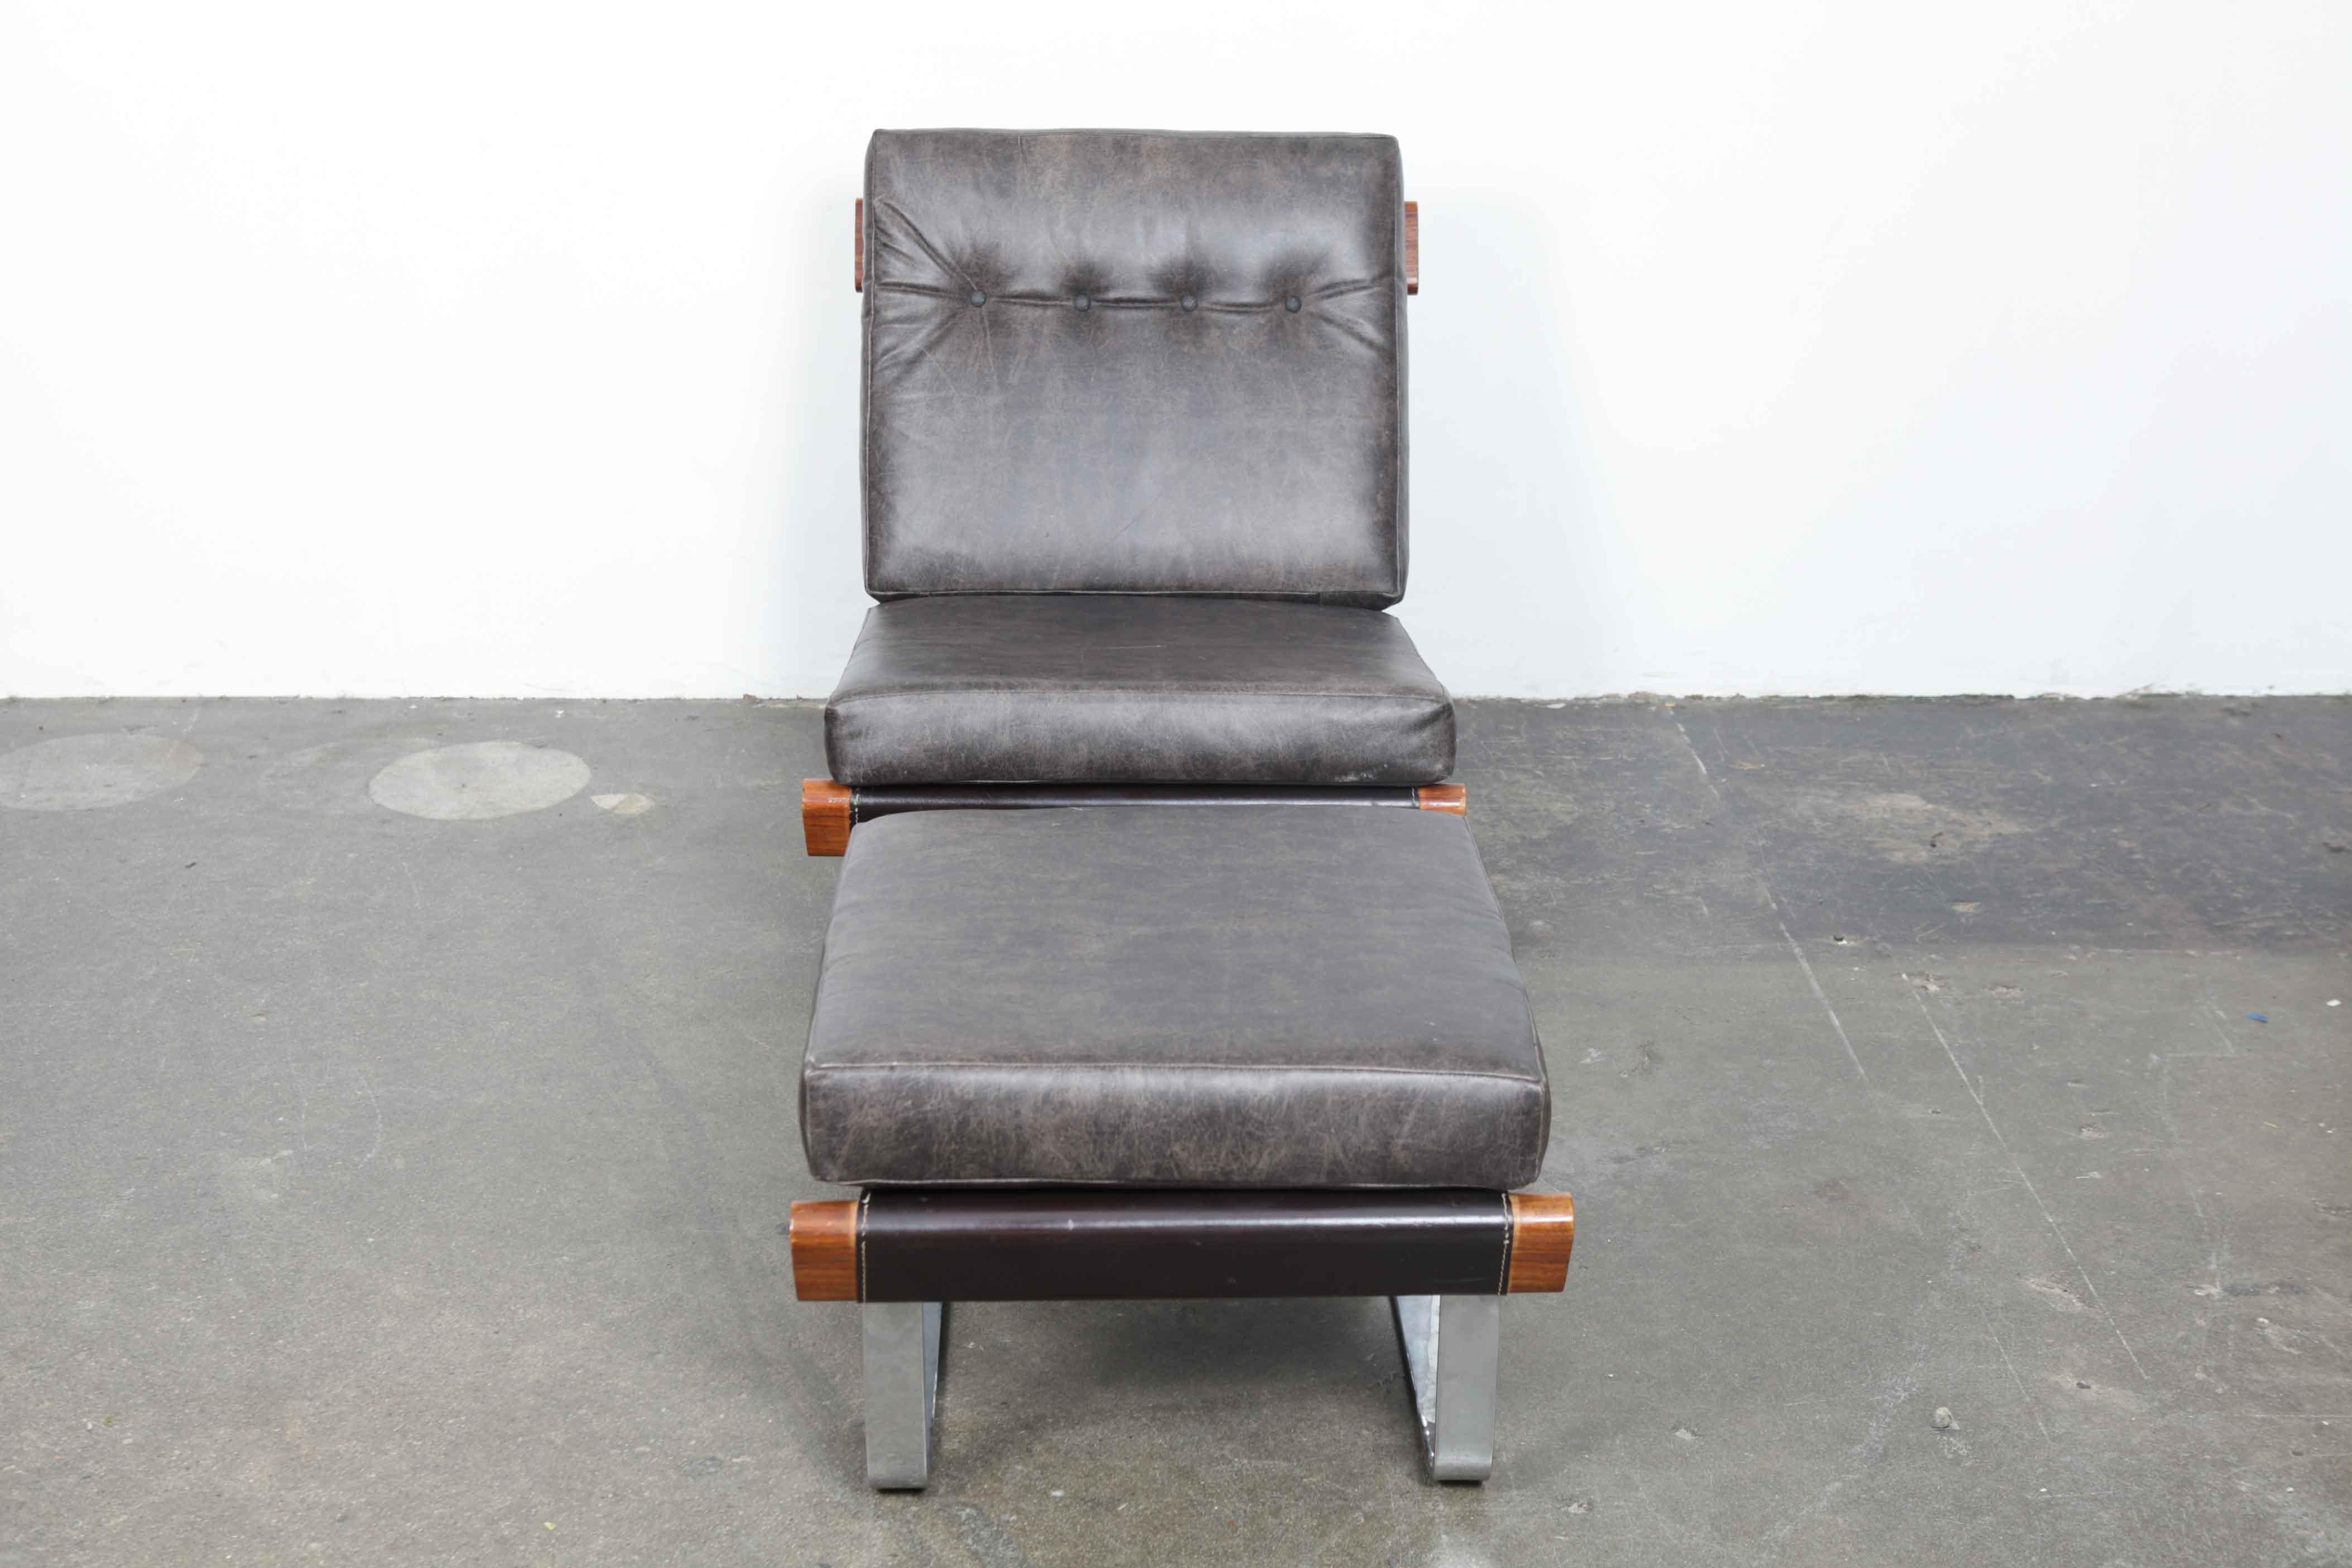 Tufted leather 1970s lounge chair with ottoman with metal and wood frame. Newly upholstered in leather, most likely made in USA. (Ottoman measures: W 24 x D 21.75 x H 17).